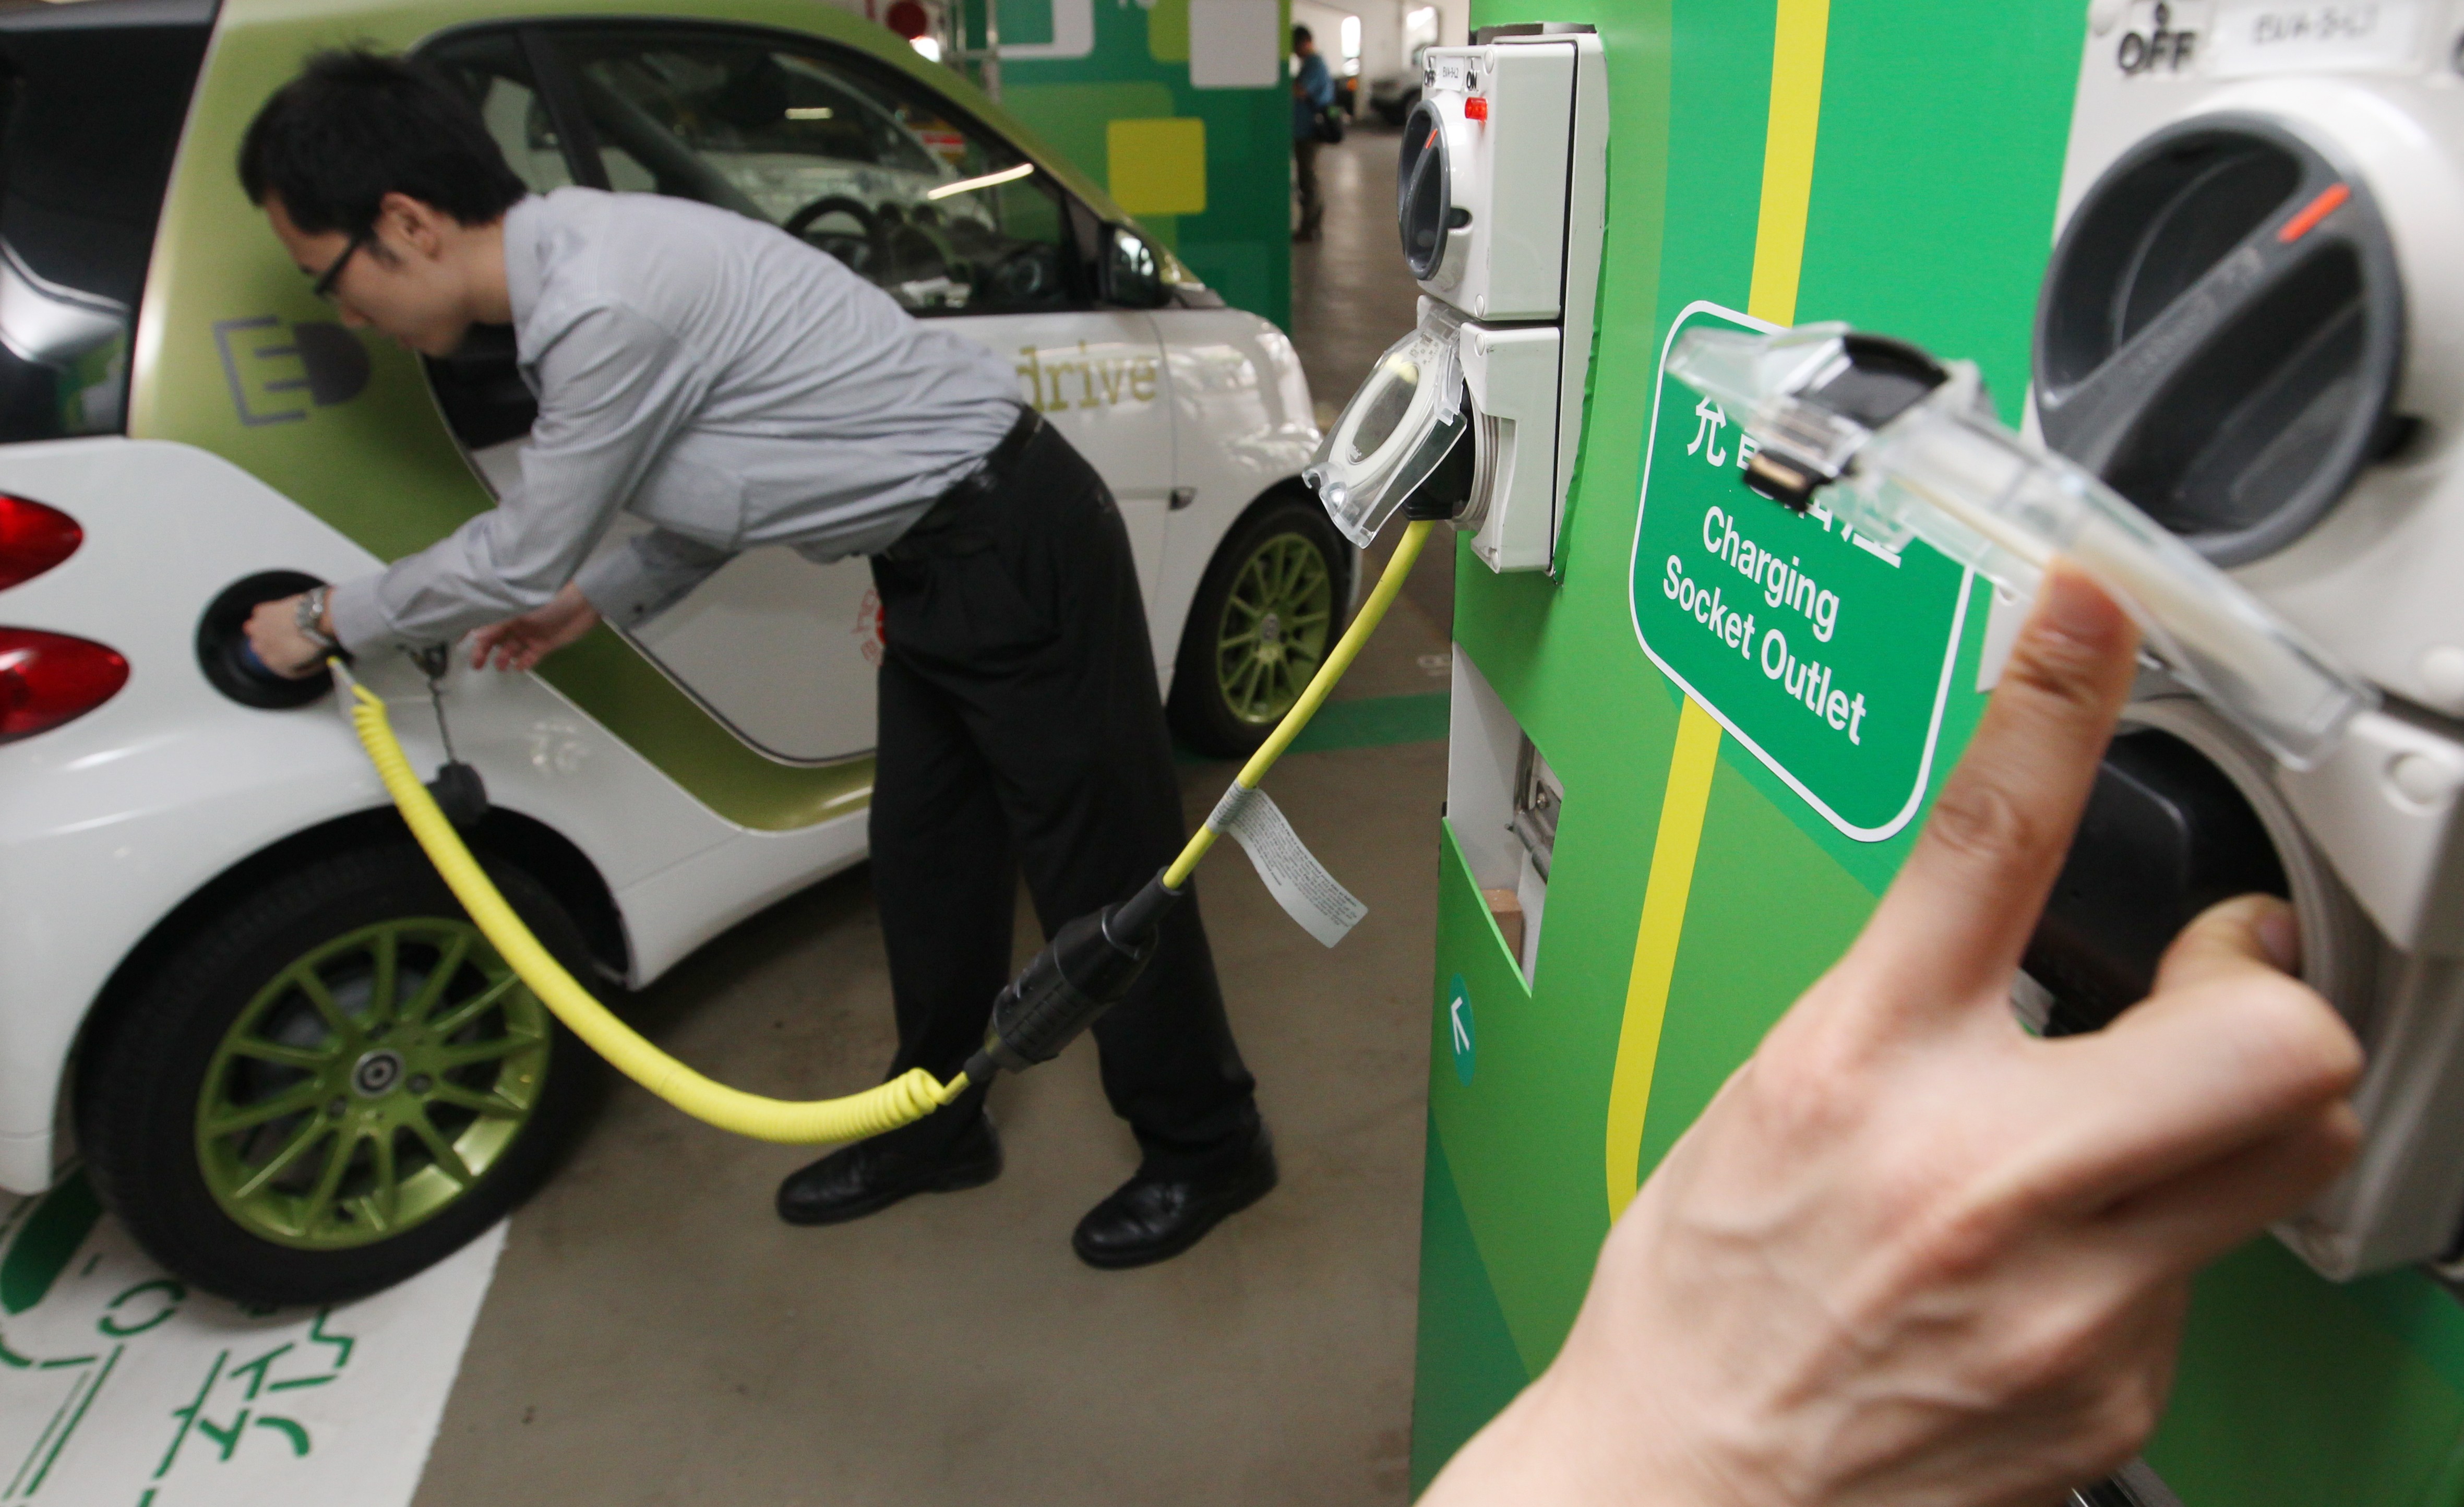 Officials show how to charge electric vehicles at the opening ceremony of the government's publicity campaign on electric vehicles and charging points in Central, in May 2012. Photo: Felix Wong